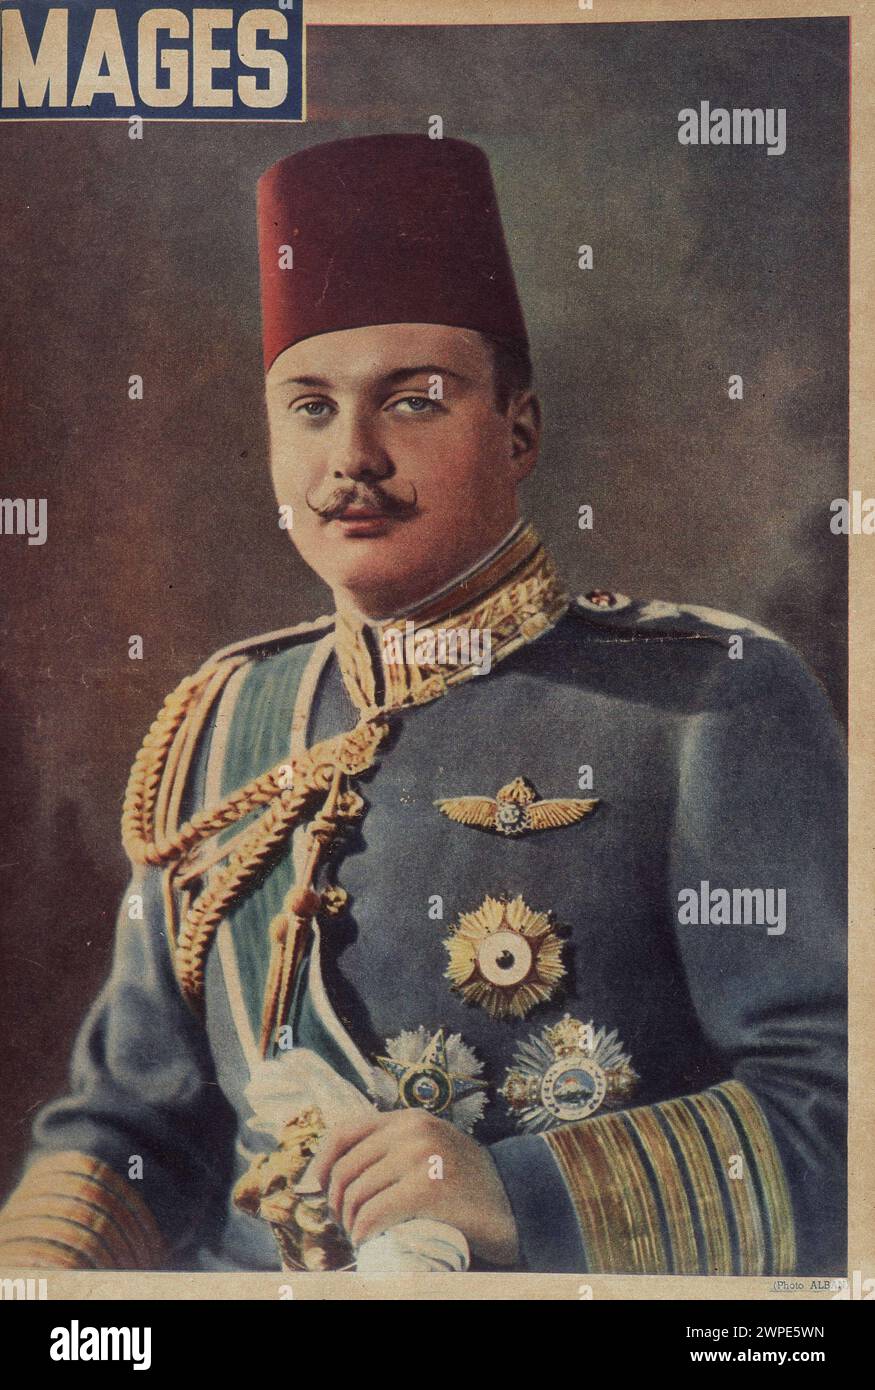 Portrait of King Farouk of Egypt (1920 - 1965), cover of the magazine Mages. Dominicans Museum, Cairo. Stock Photo